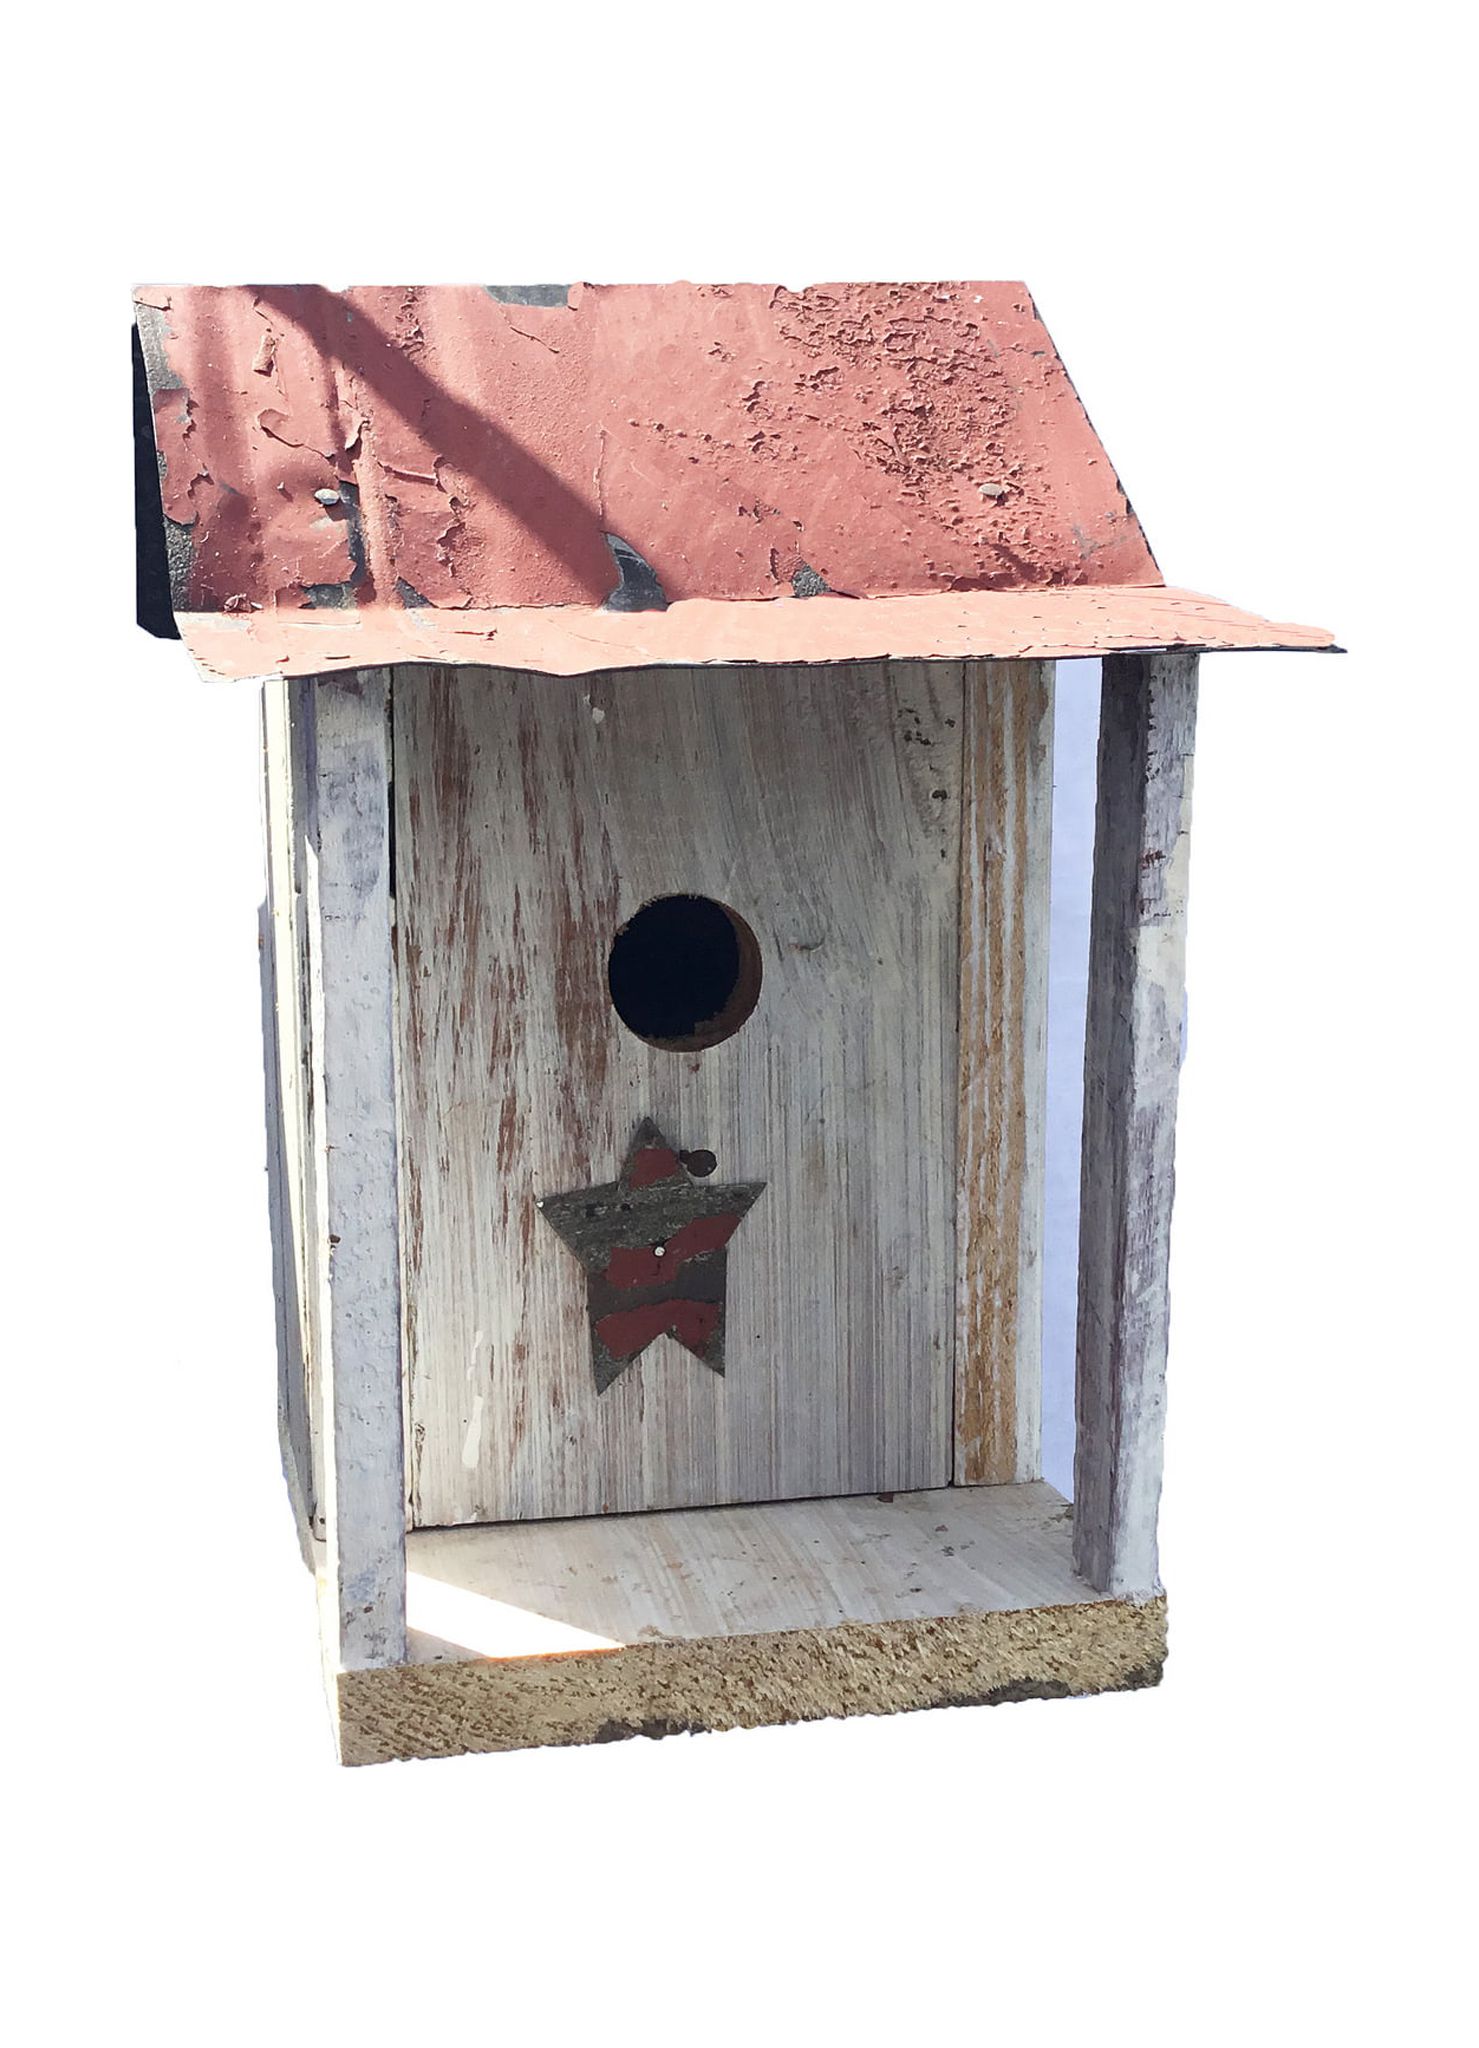 Barn Wood Bird House with Porch - image 1 of 2